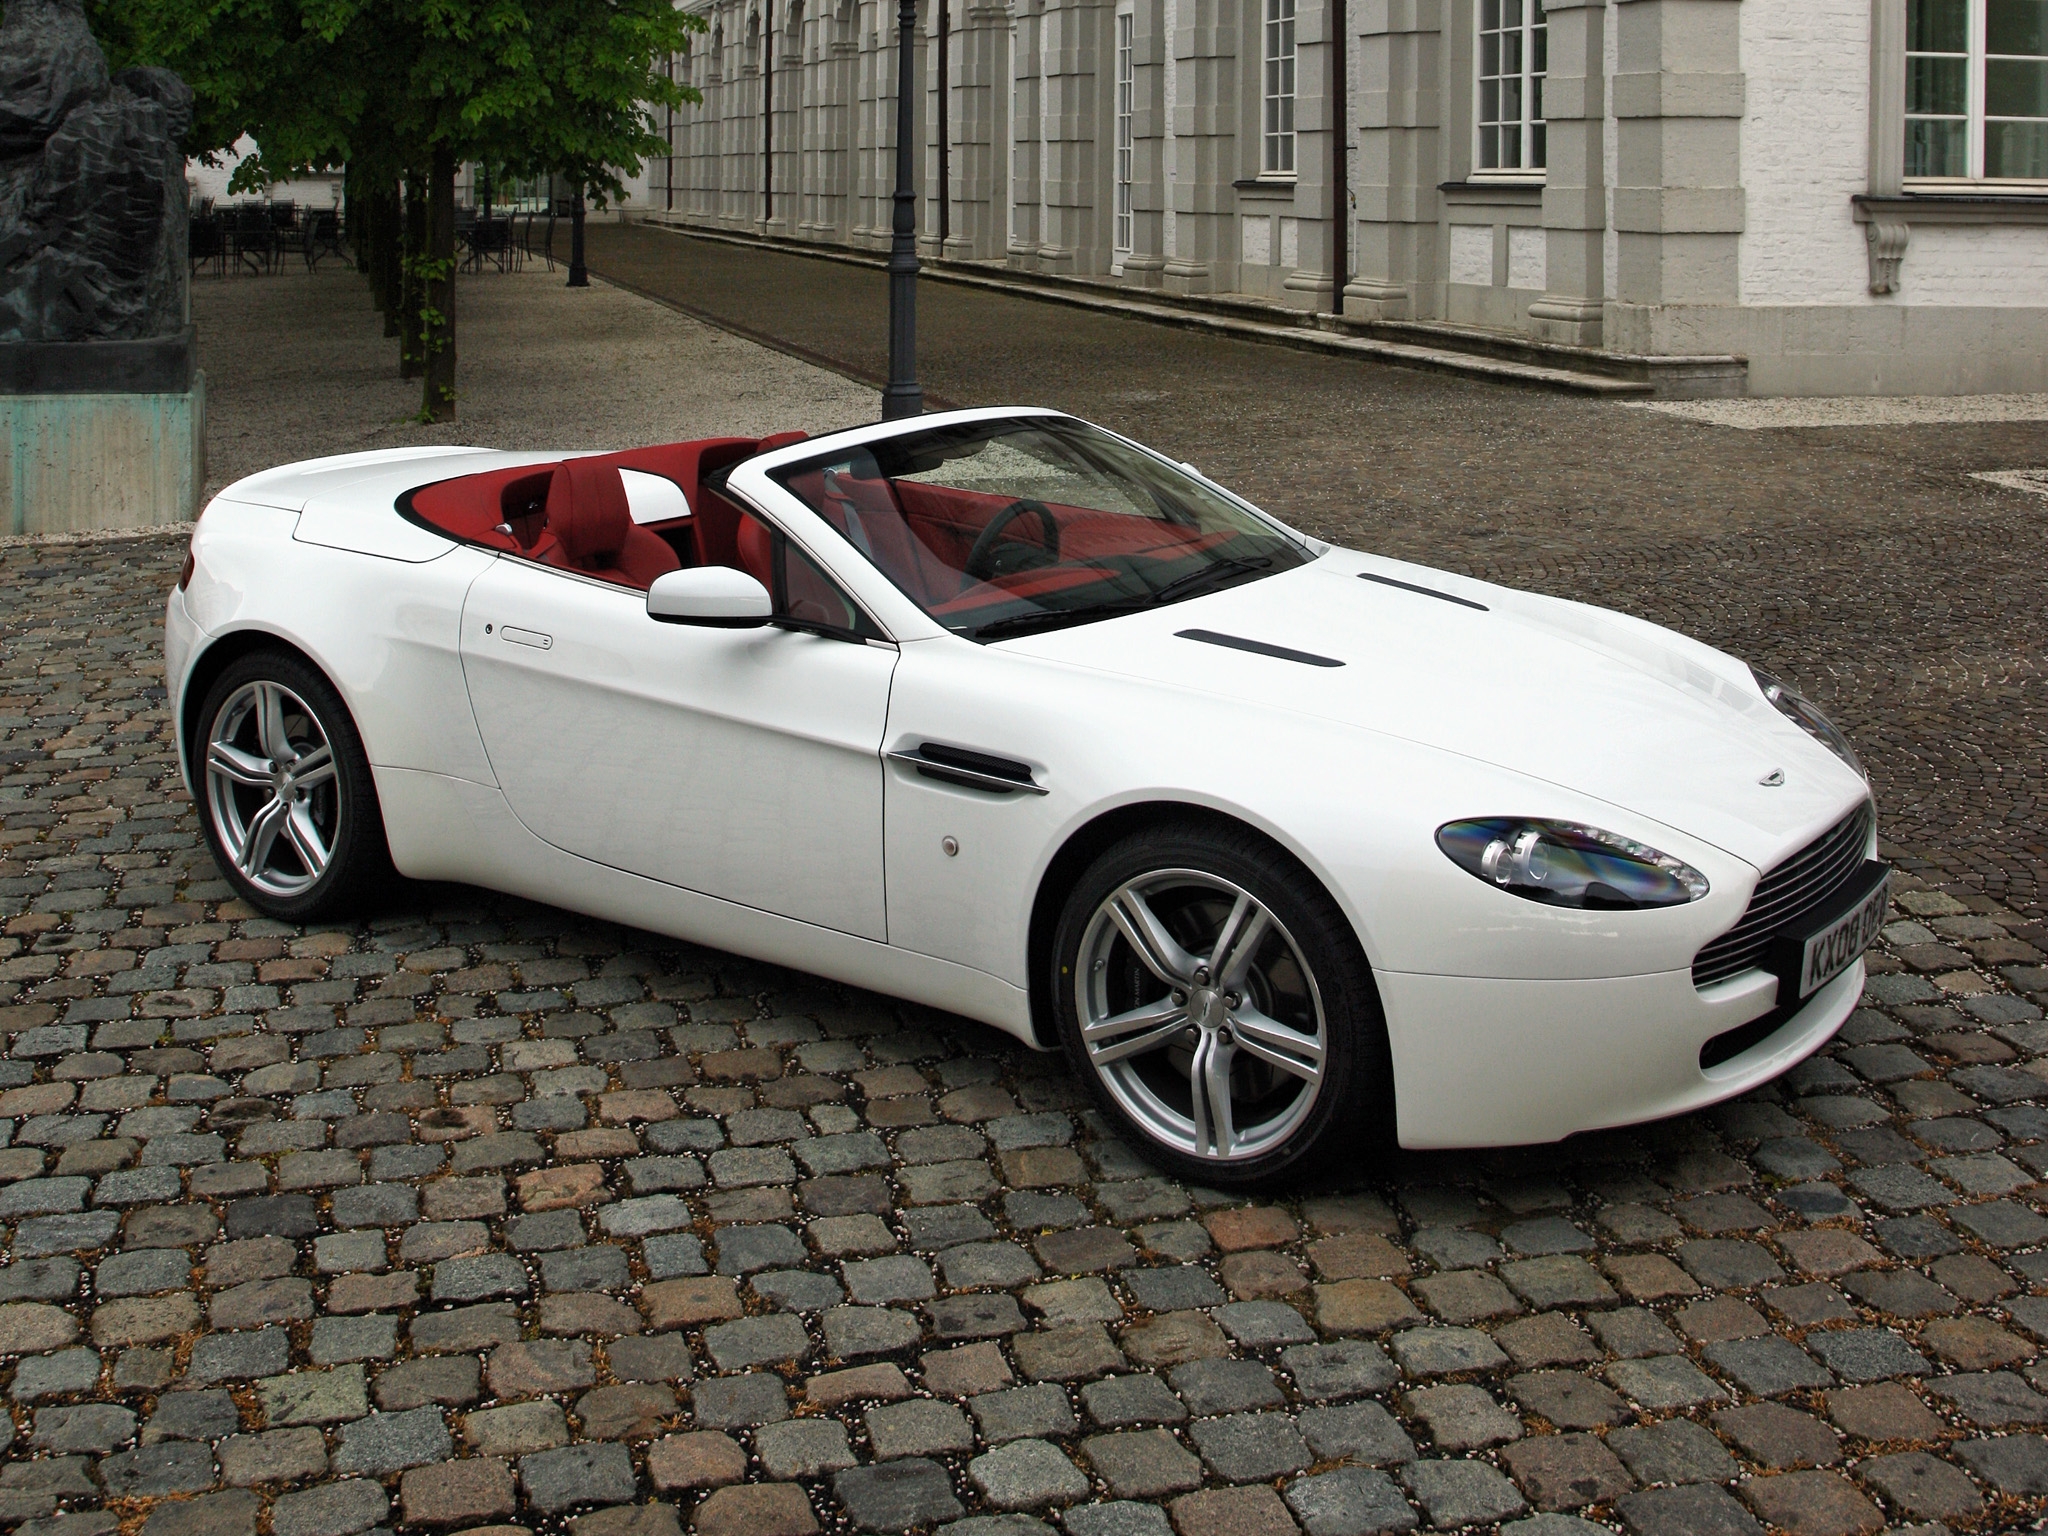 v8, aston martin, cars, white, side view, style, cabriolet, 2008, street, vantage HD wallpaper